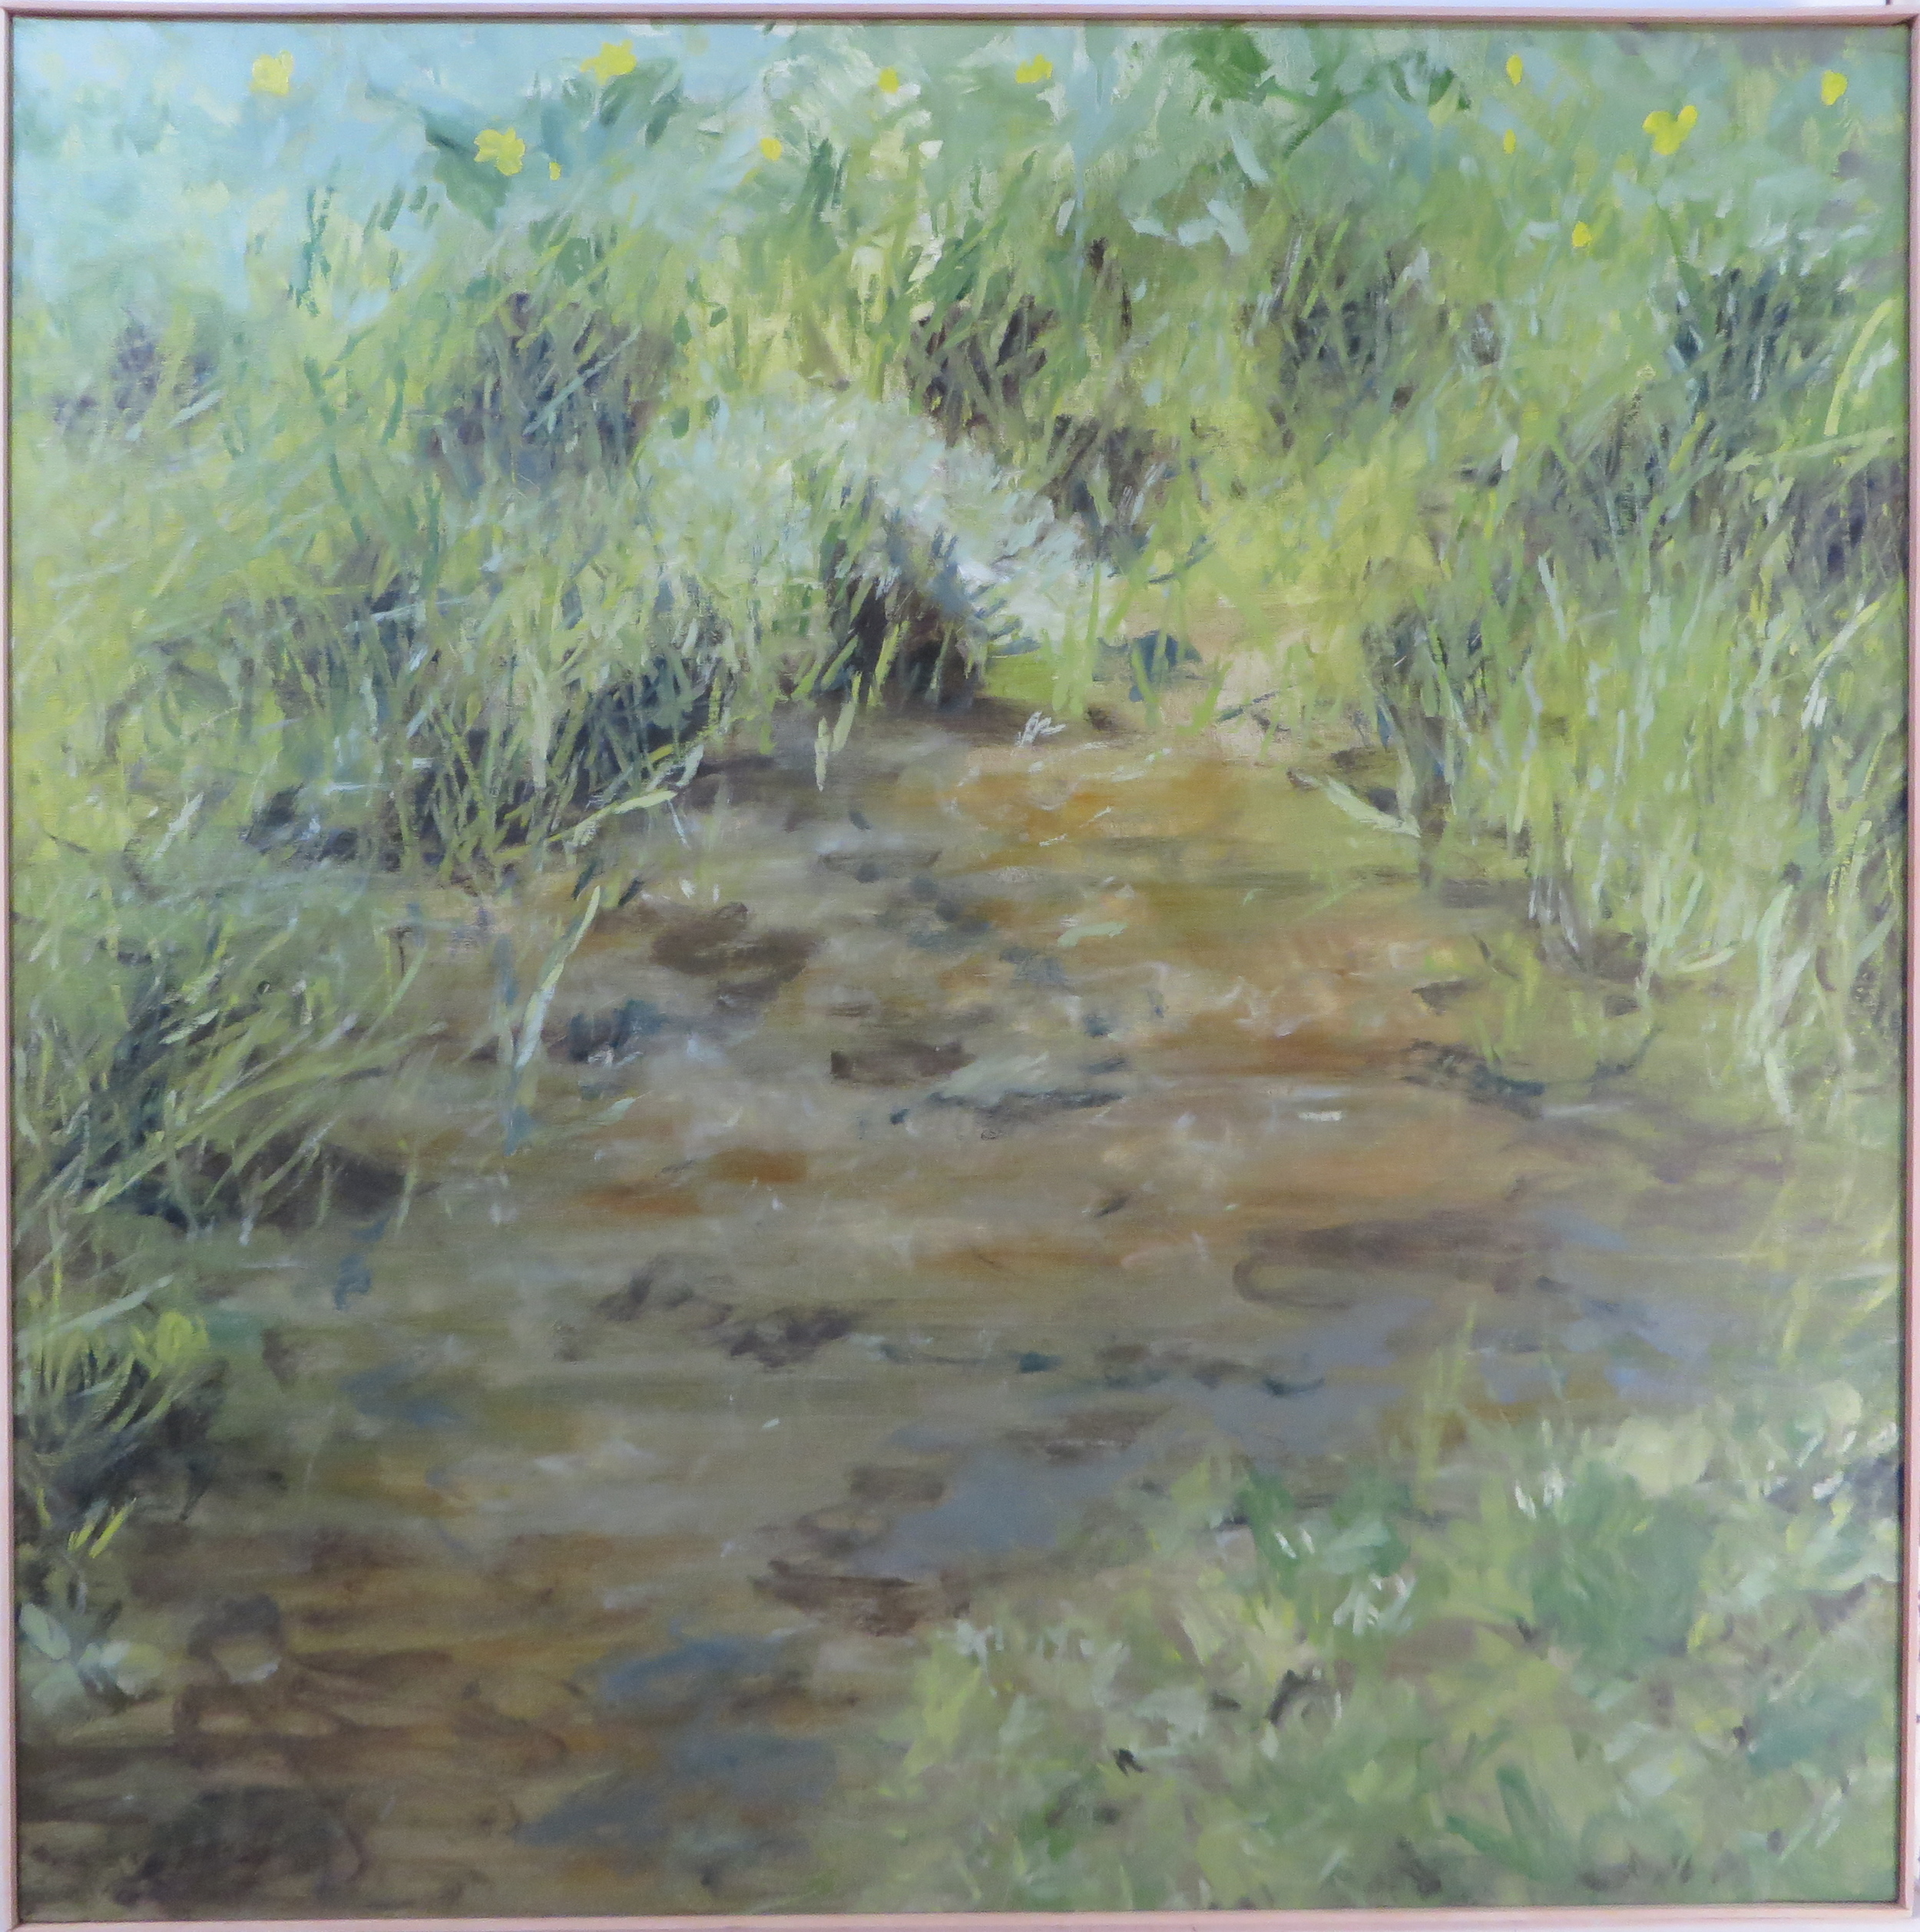 Patch of Turf, 2008